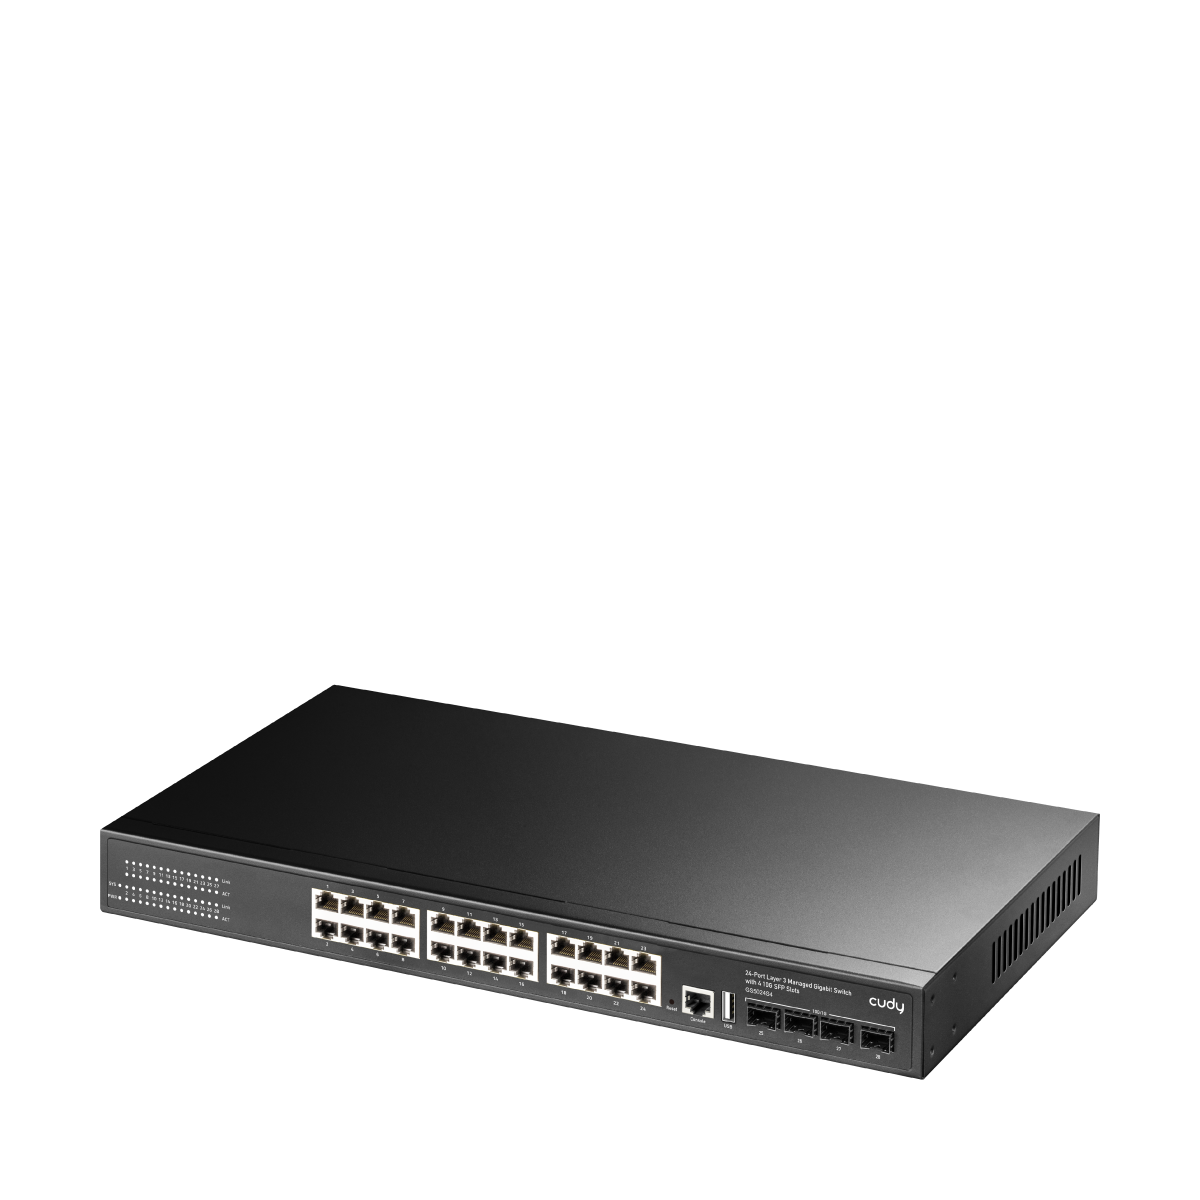 24-GbE 4-SFP+ L3 Managed Gigabit Switch, GS5024S4 1.0